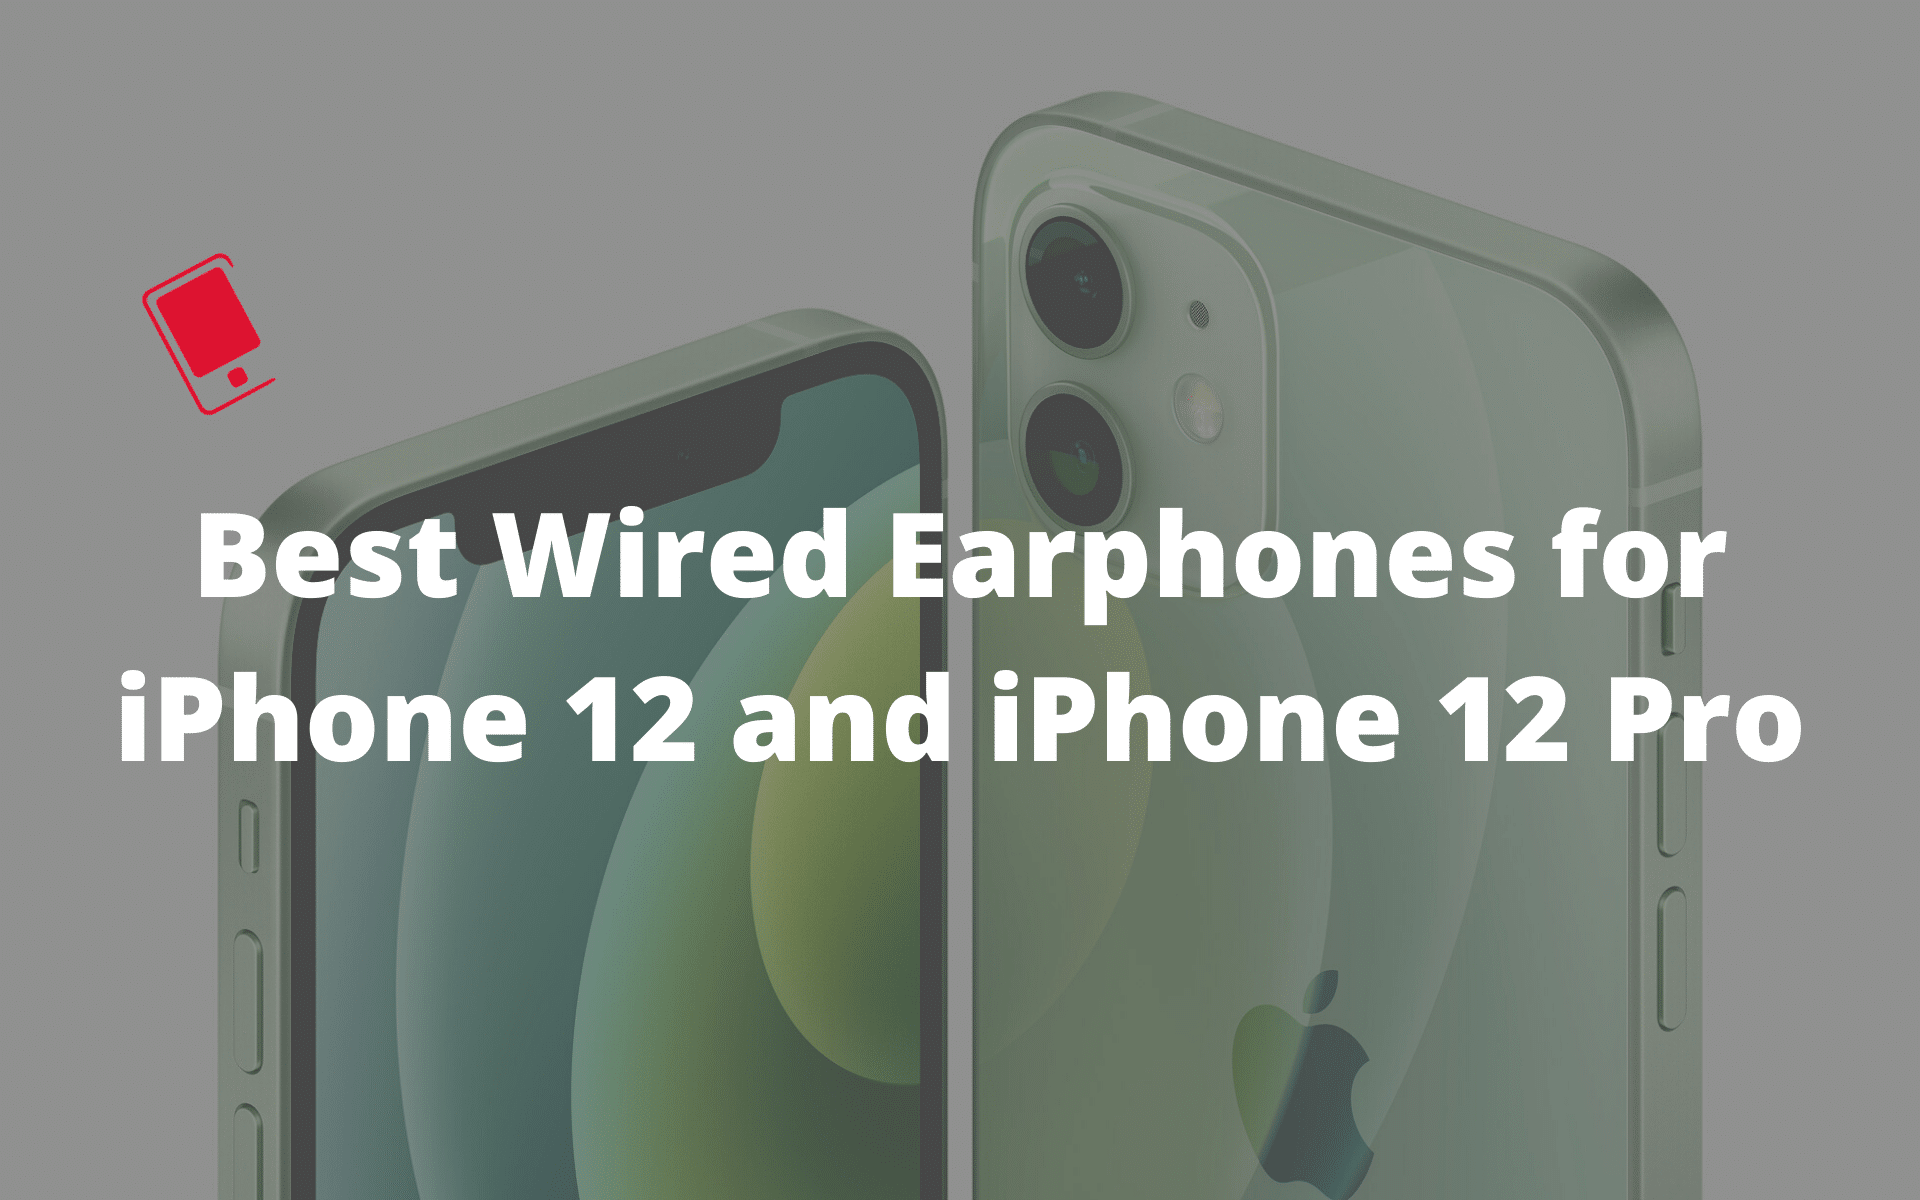 wired earphones for iPhone 12